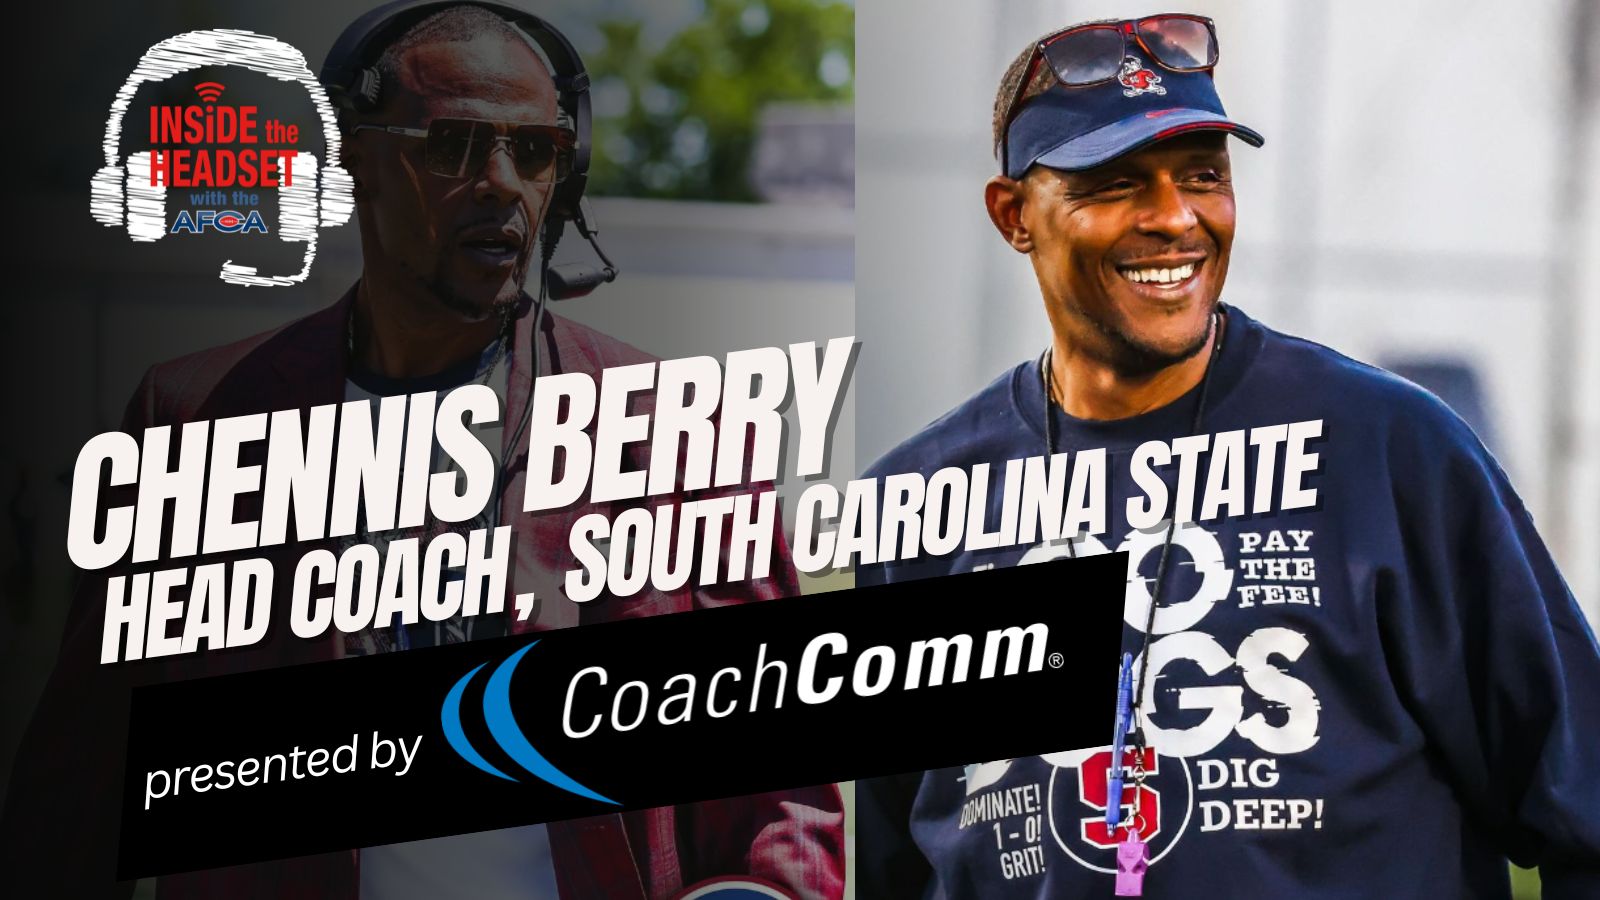 South Carolina State Head Coach Chennis Berry is on this week's inside the headset